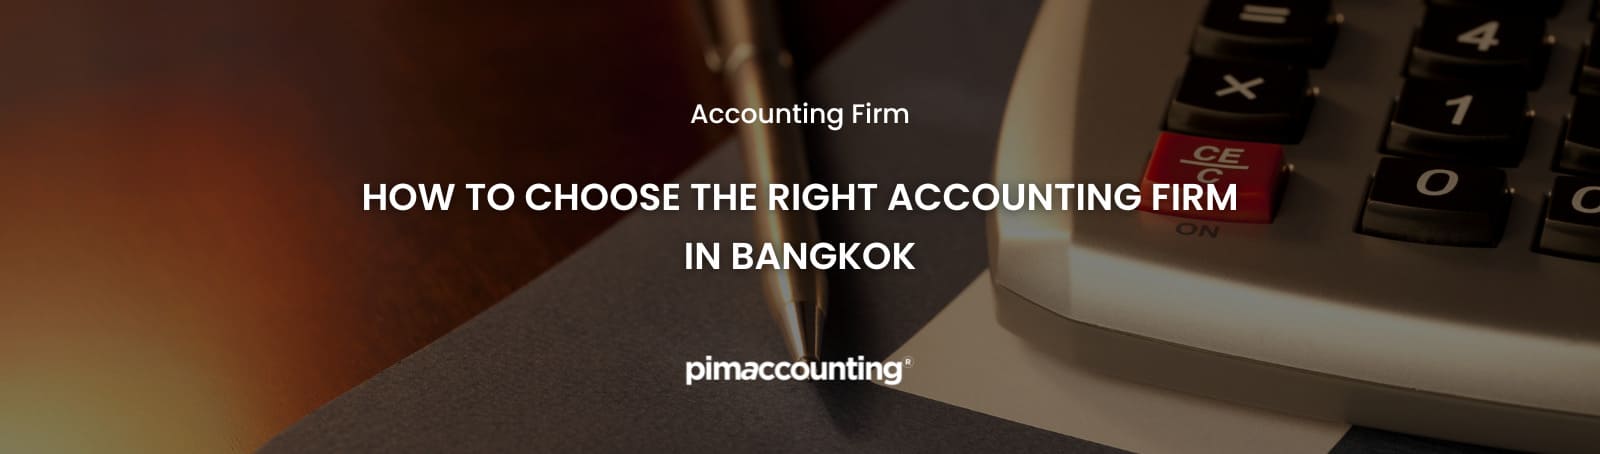 accounting firm - pimaccounting